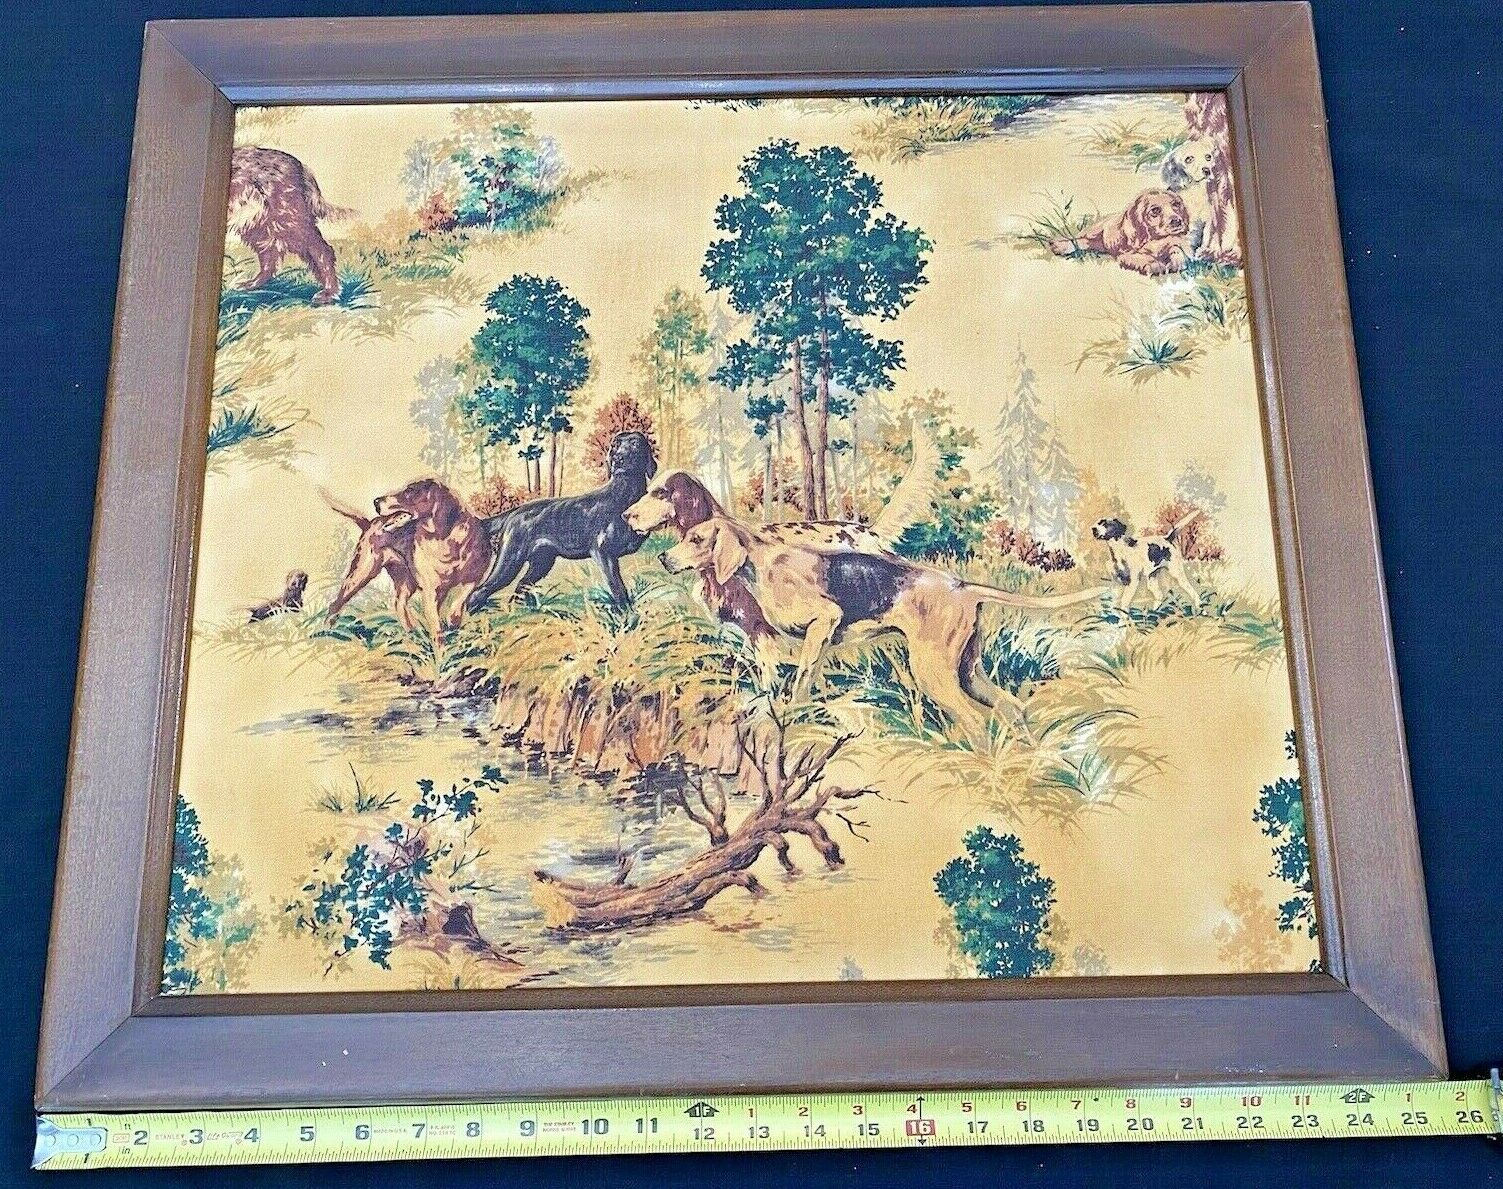 Vintage 3d Framed Stuffed Fabric Wall Hanging Hunting Dogs For Lodge Or Cabin